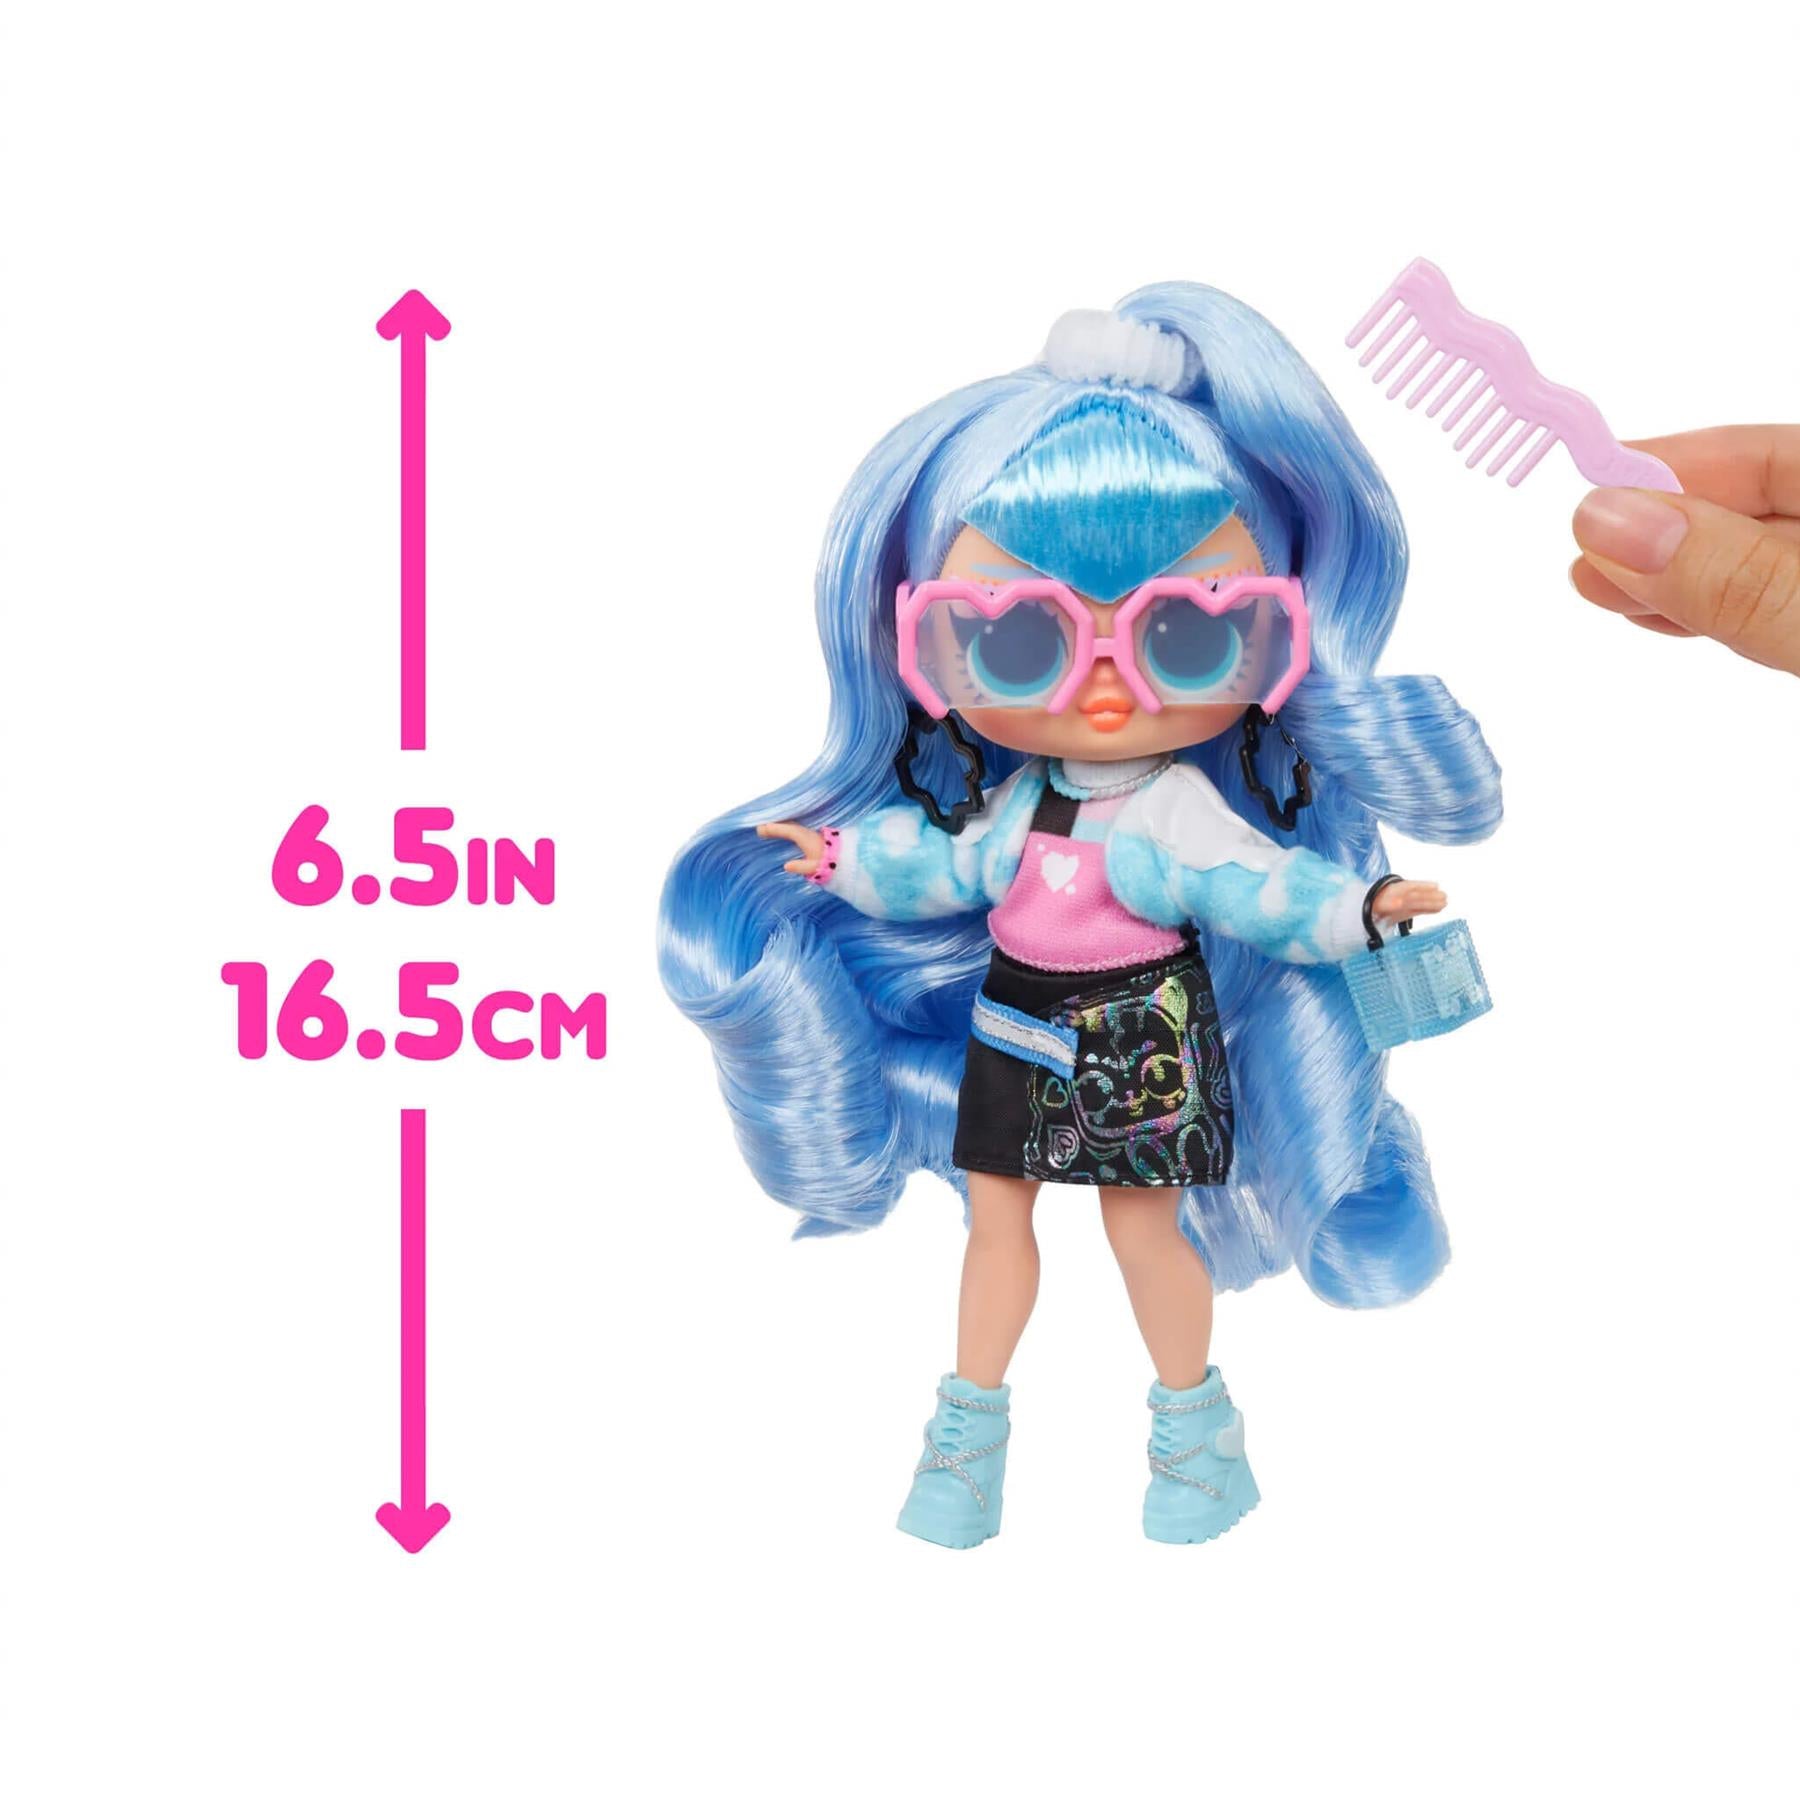 LOL Surprise Tweens Fashion Doll Ellie Fly with 10+ Surprises